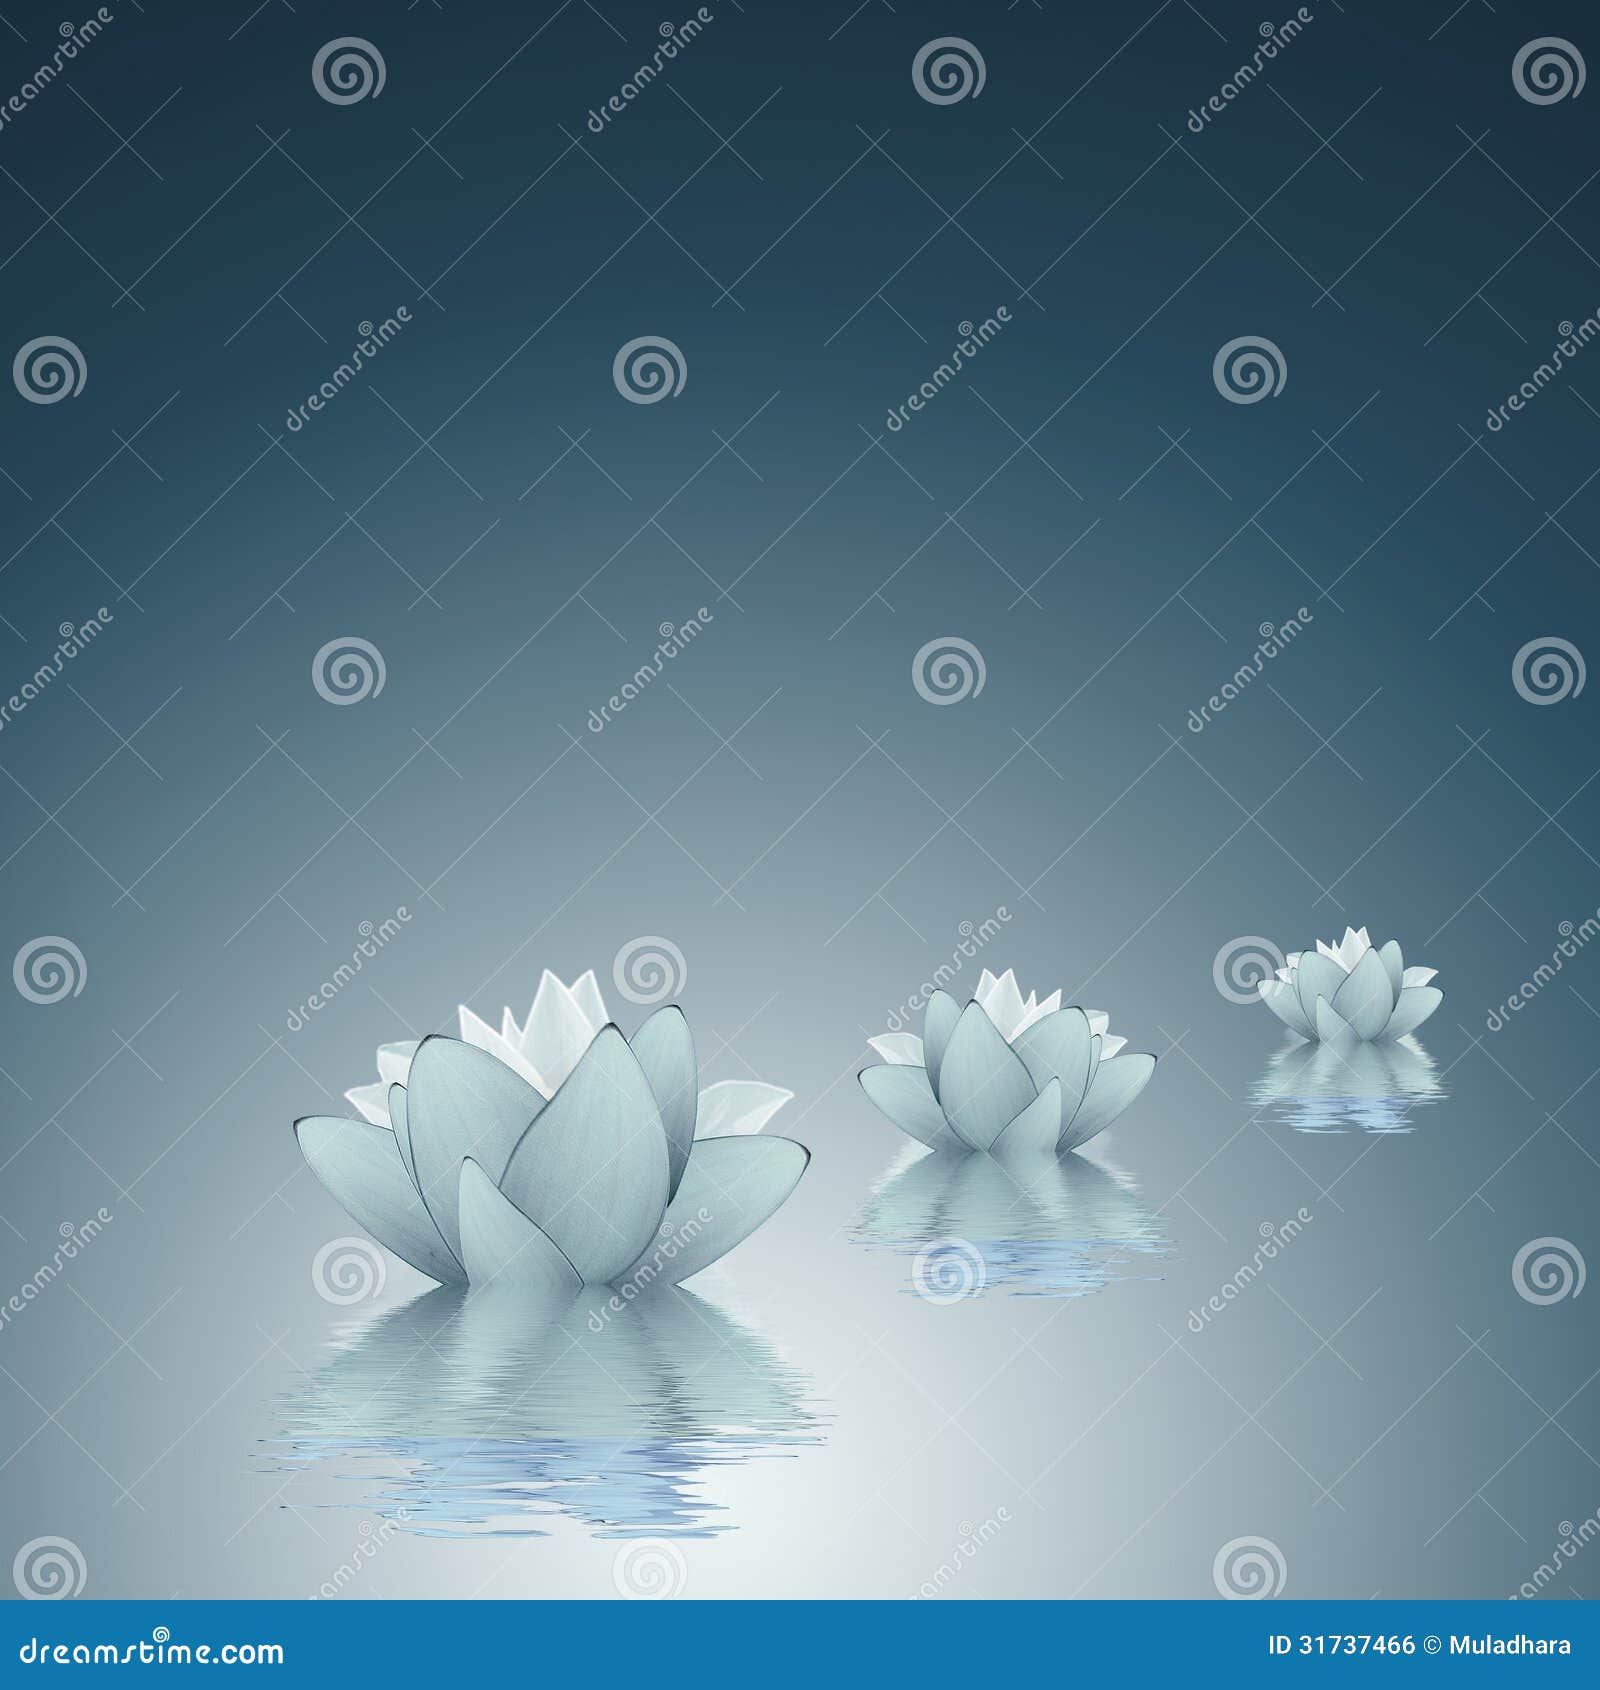 lotus - purity background